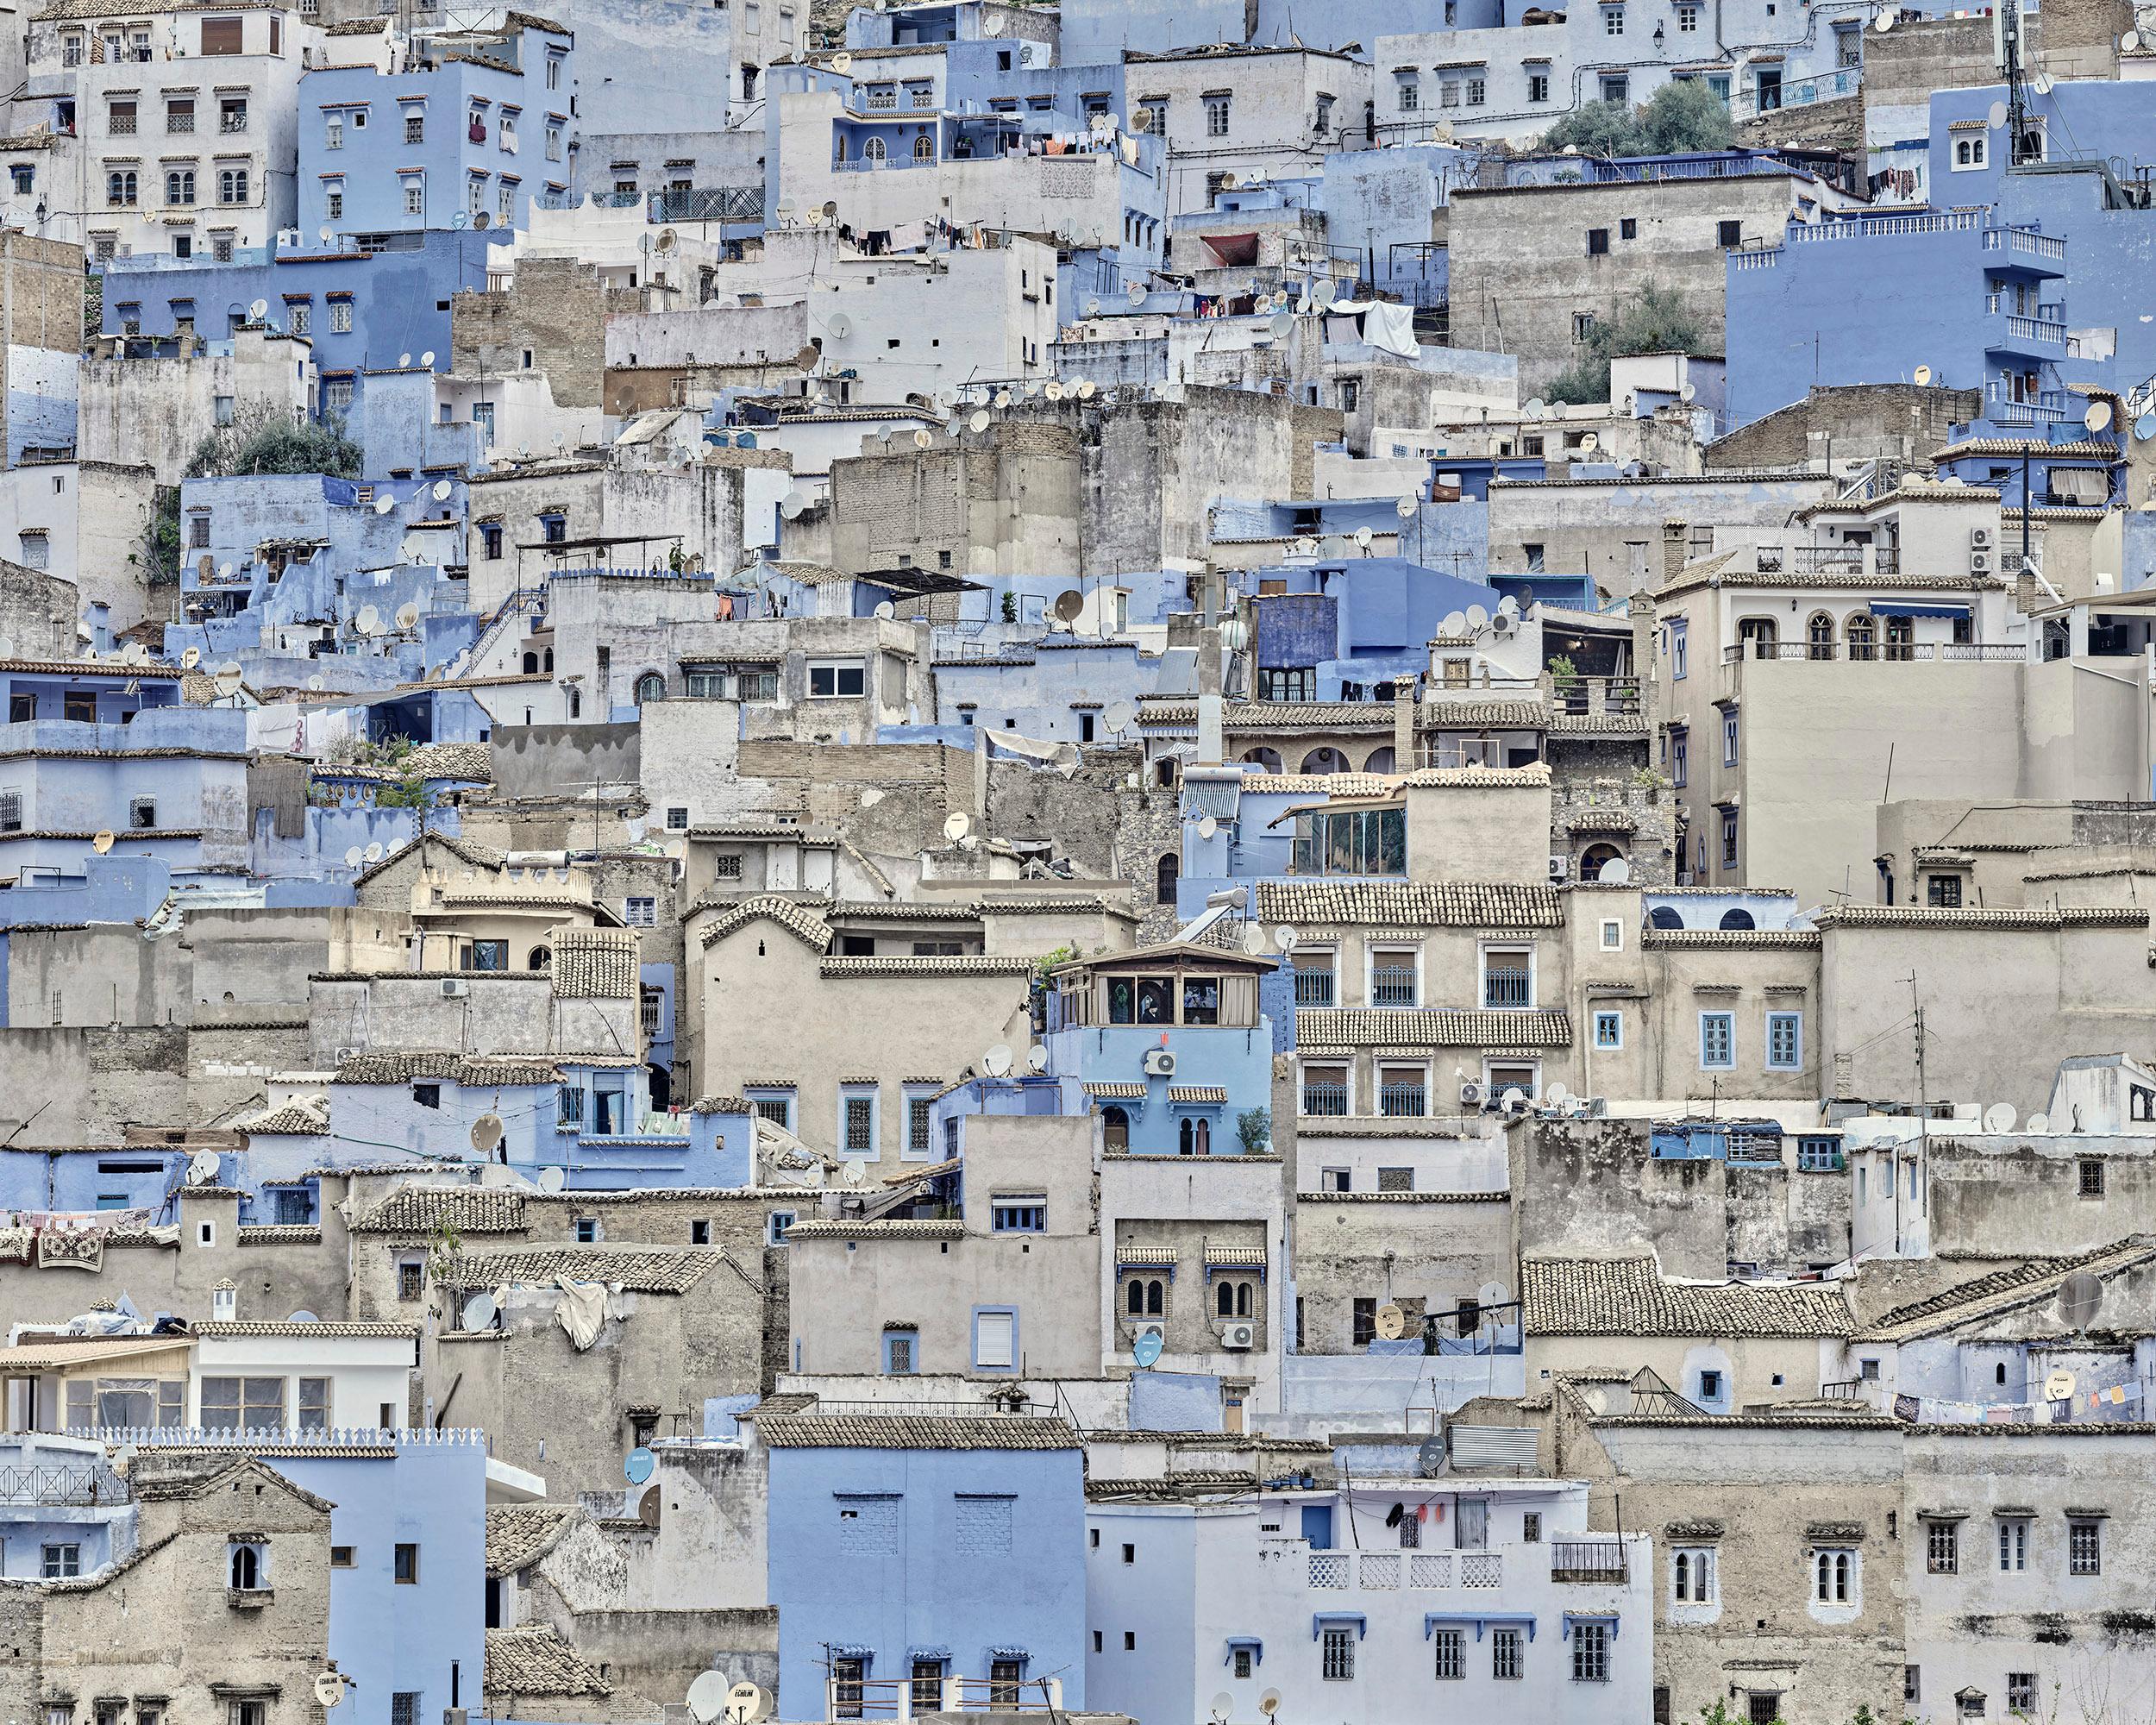 Morocco

Available Sizes:
21 x 26 inches: Edition of 7
32 x 40 inches: Edition of 7
44 x 55 inches: Edition of 10
59 x 73.5 inches: Edition of 5

David Burdeny (b. 1968. Winnipeg, Canada) graduated with a Masters in Architecture and Interior Design